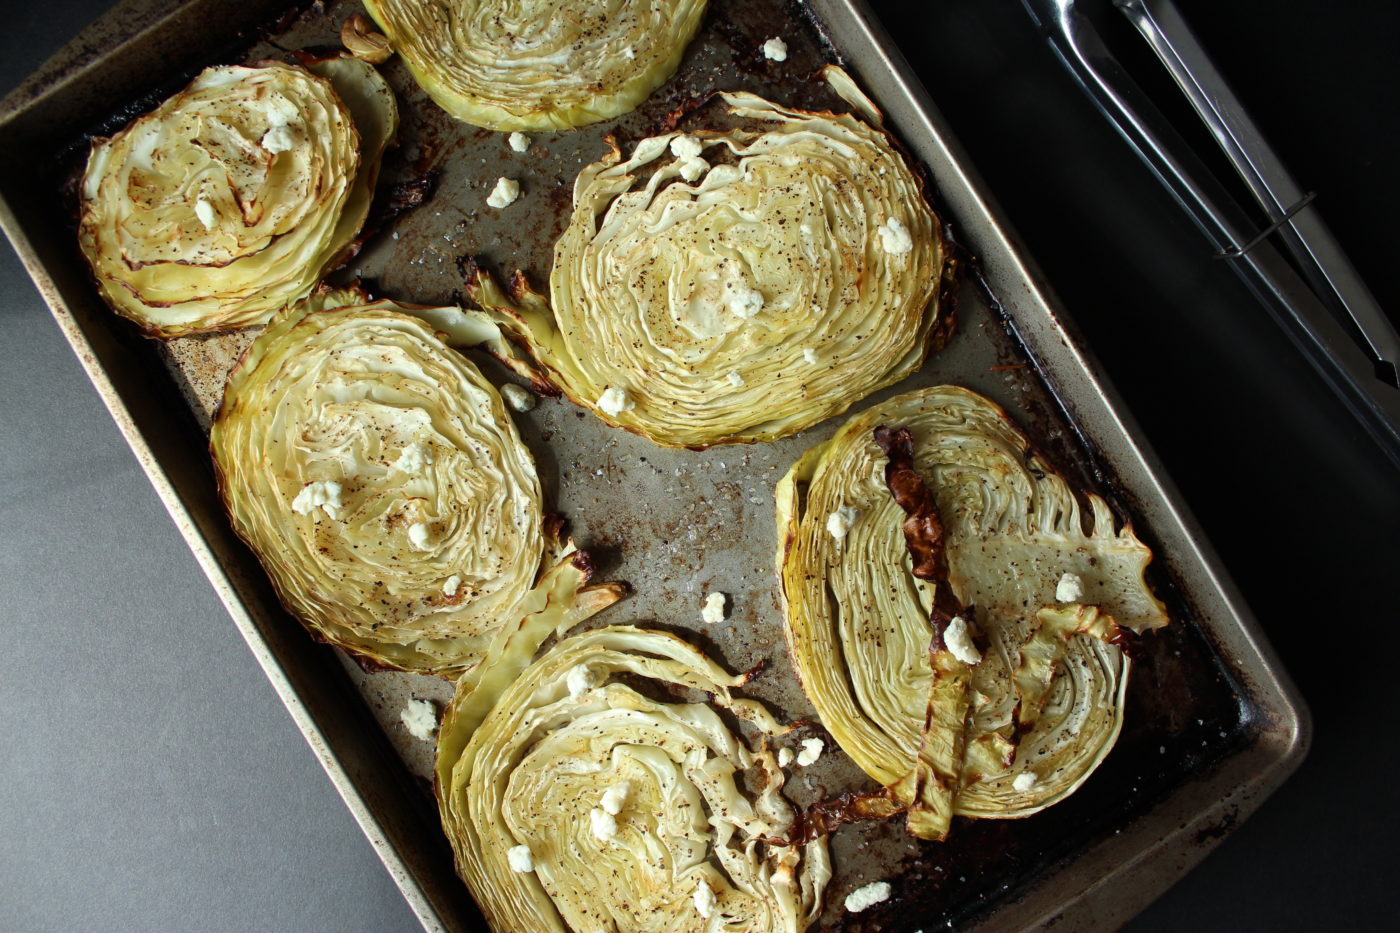 Roasted cabbage is an easy, delicious side dish.